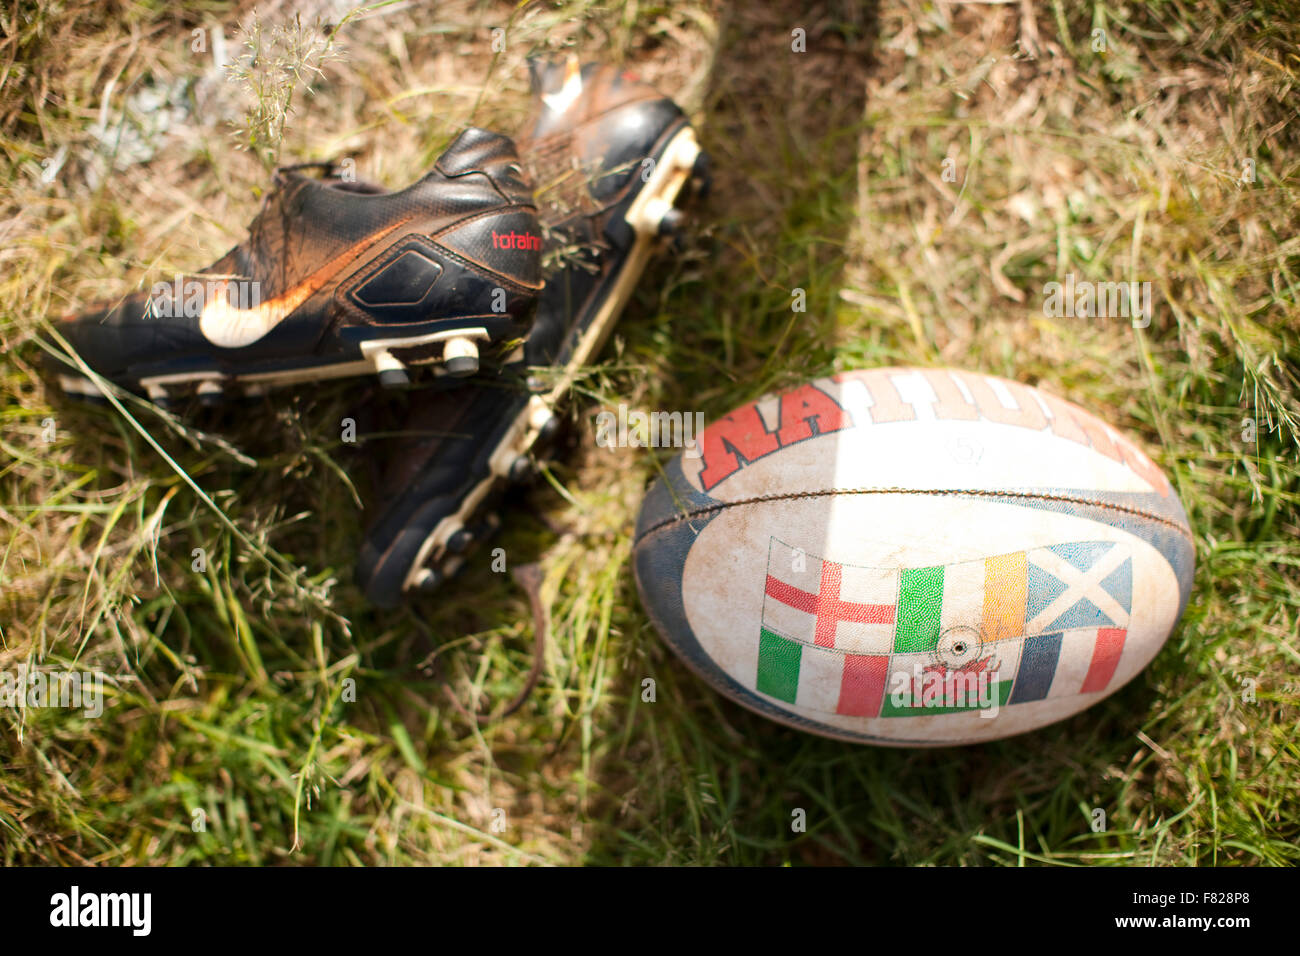 Rugby ball and cleats Stock Photo